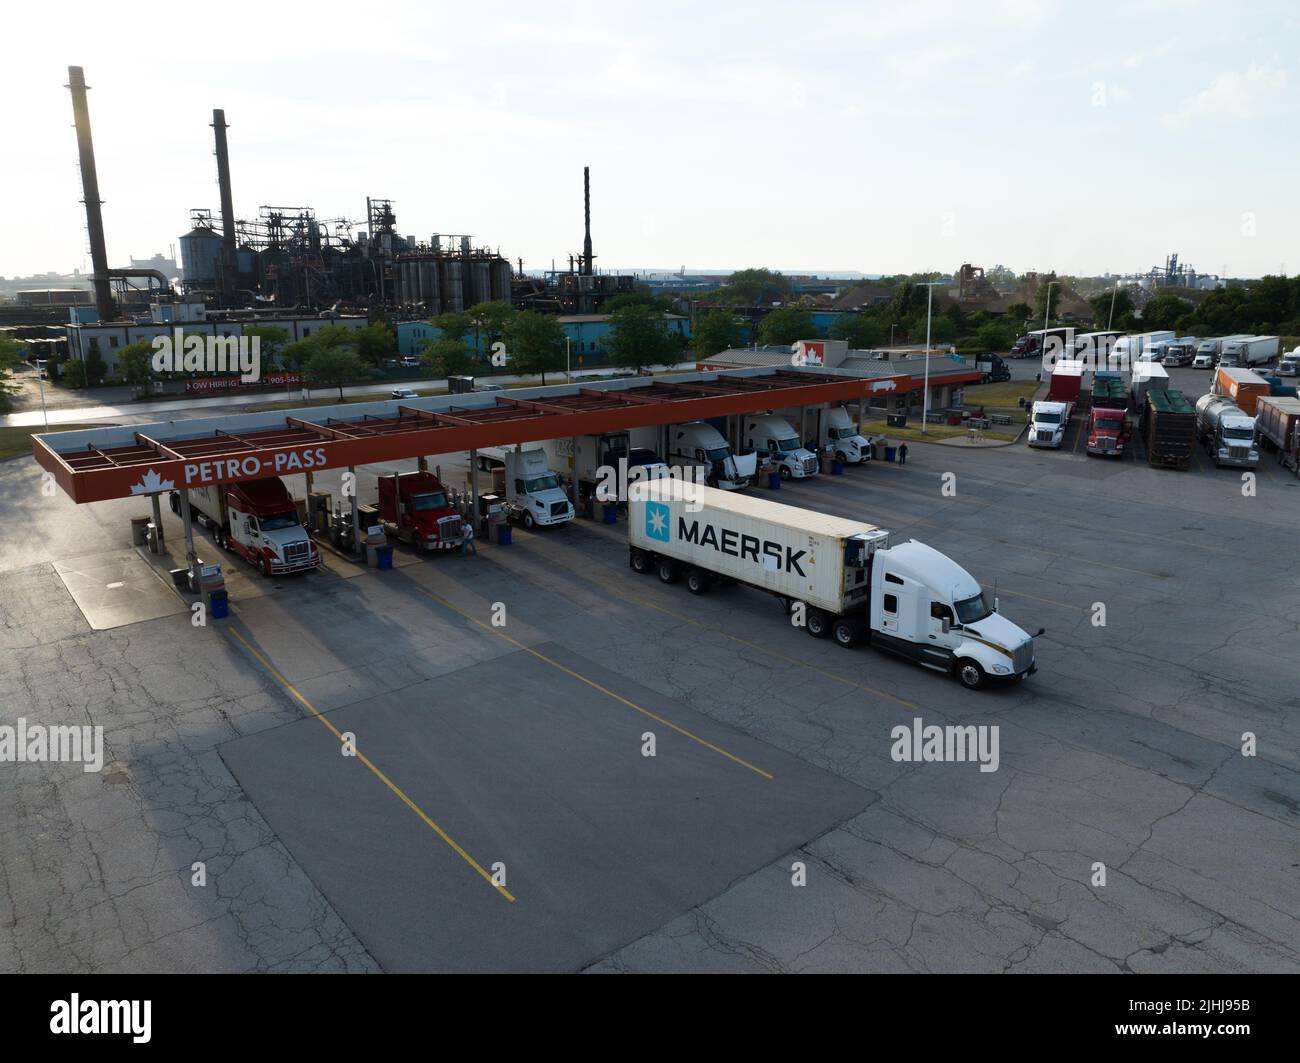 A Maersk container on a transport truck leaves a large gas station in an industrial sector on a sunny afternoon. Stock Photo